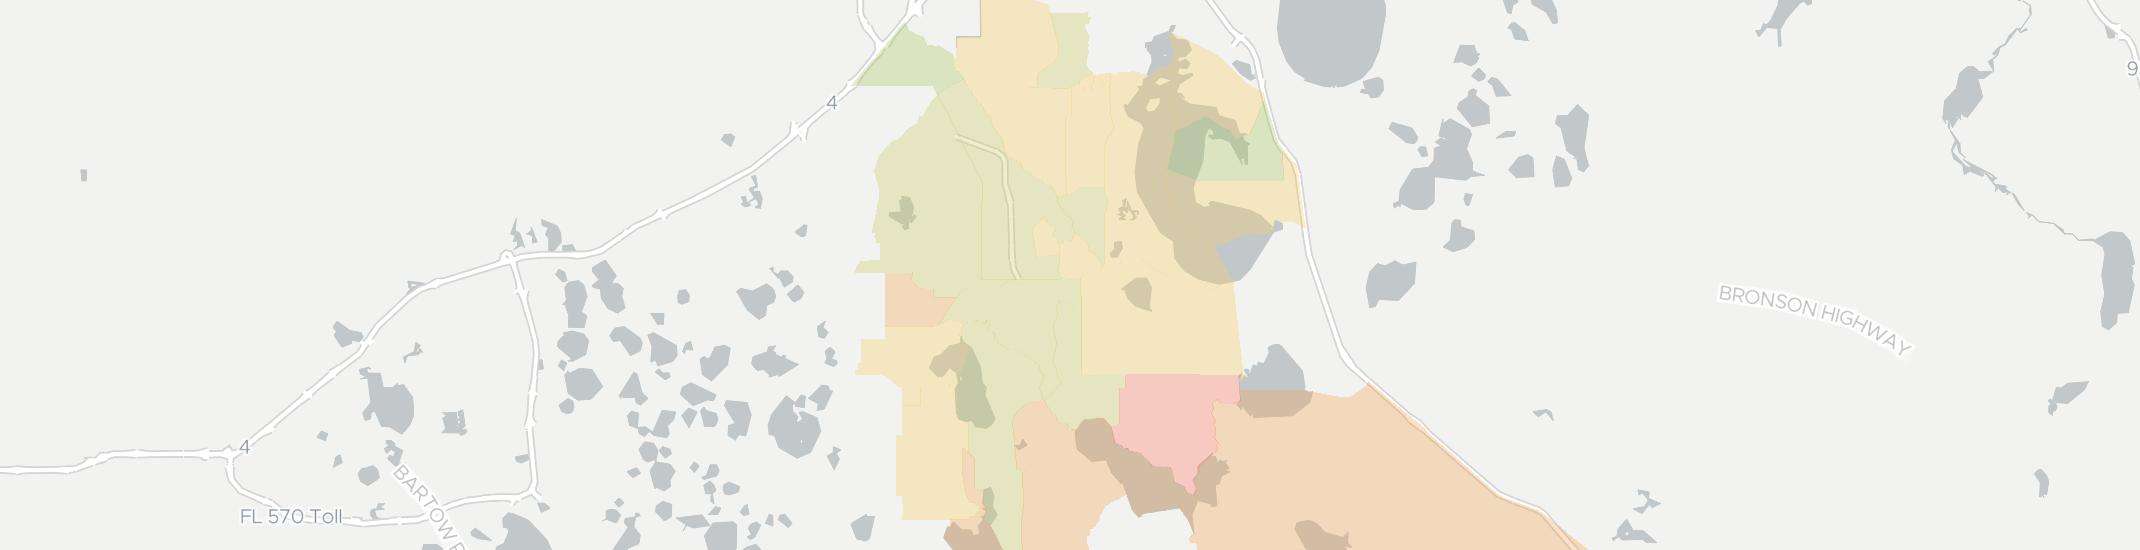 Poinciana Internet Competition Map. Click for interactive map